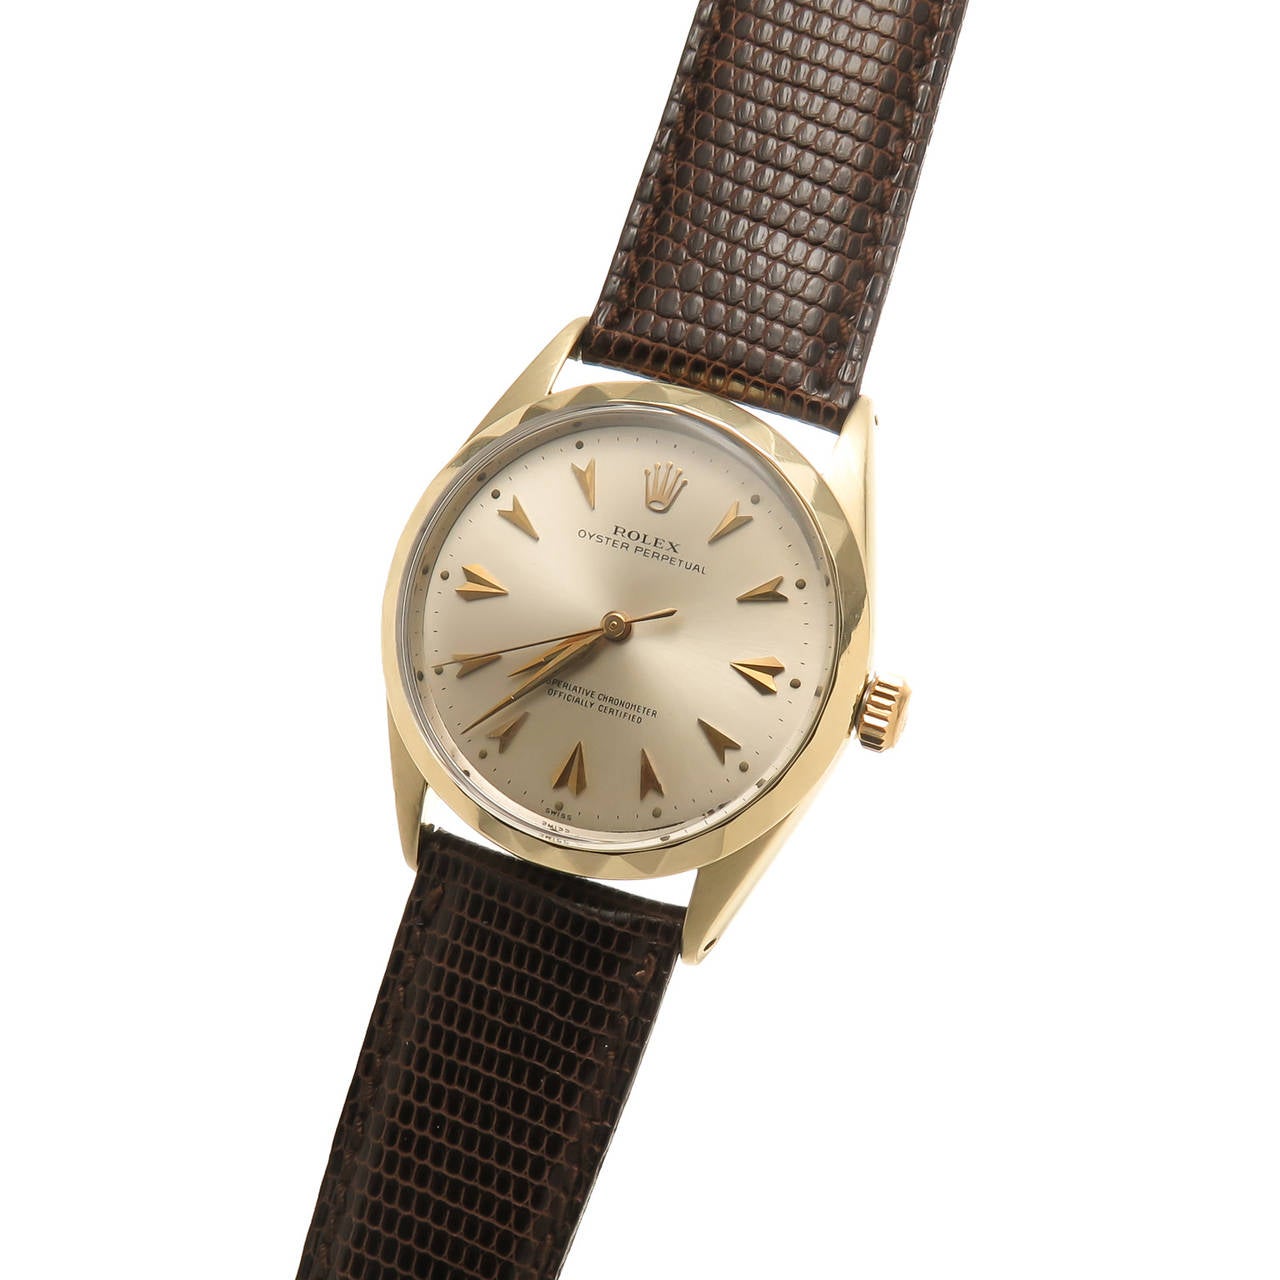 Circa 1960s Rolex reference 1025, 34 MM heavy Gold Shell With steel back case, Oyster perpetual. Automatic self winding 26 jewel, Caliber 1560 movement. Original mint condition silvered dial with raised Gold Arrowhead Markers and an unusual scarce